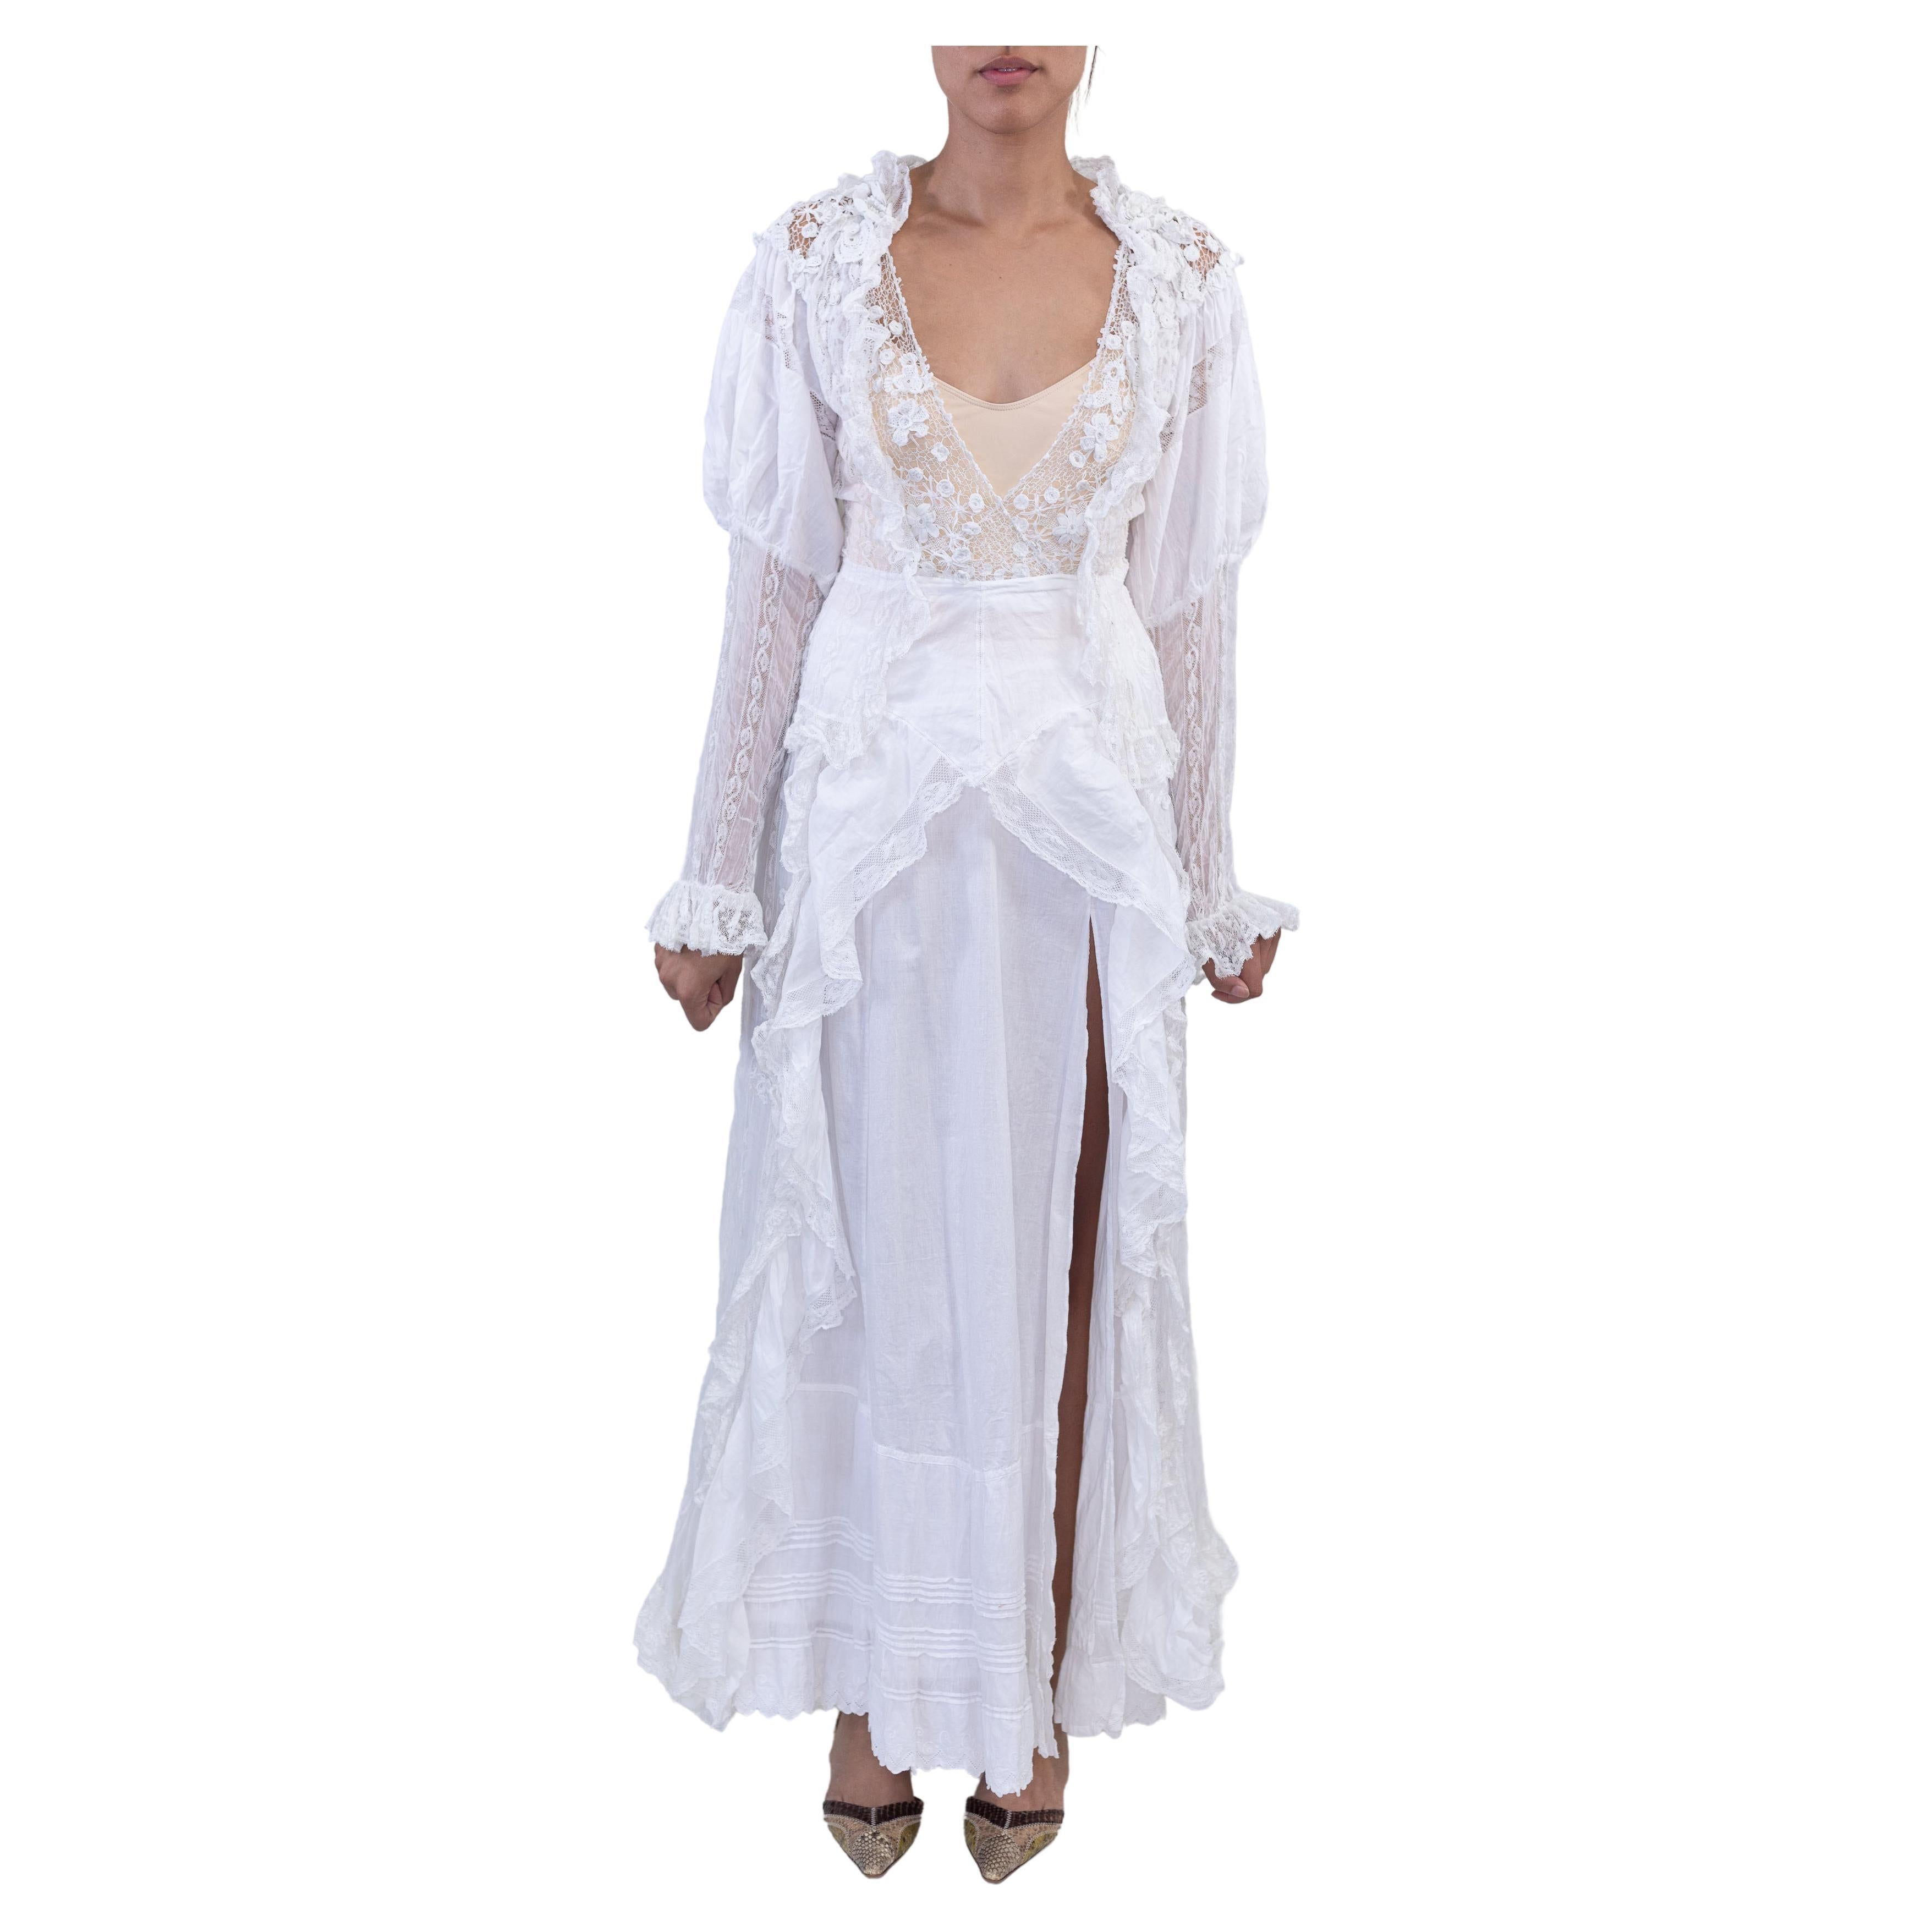 MORPHEW ATELIER White Victorian Cotton & Hand Made Lace Dress With Long Sleeves For Sale